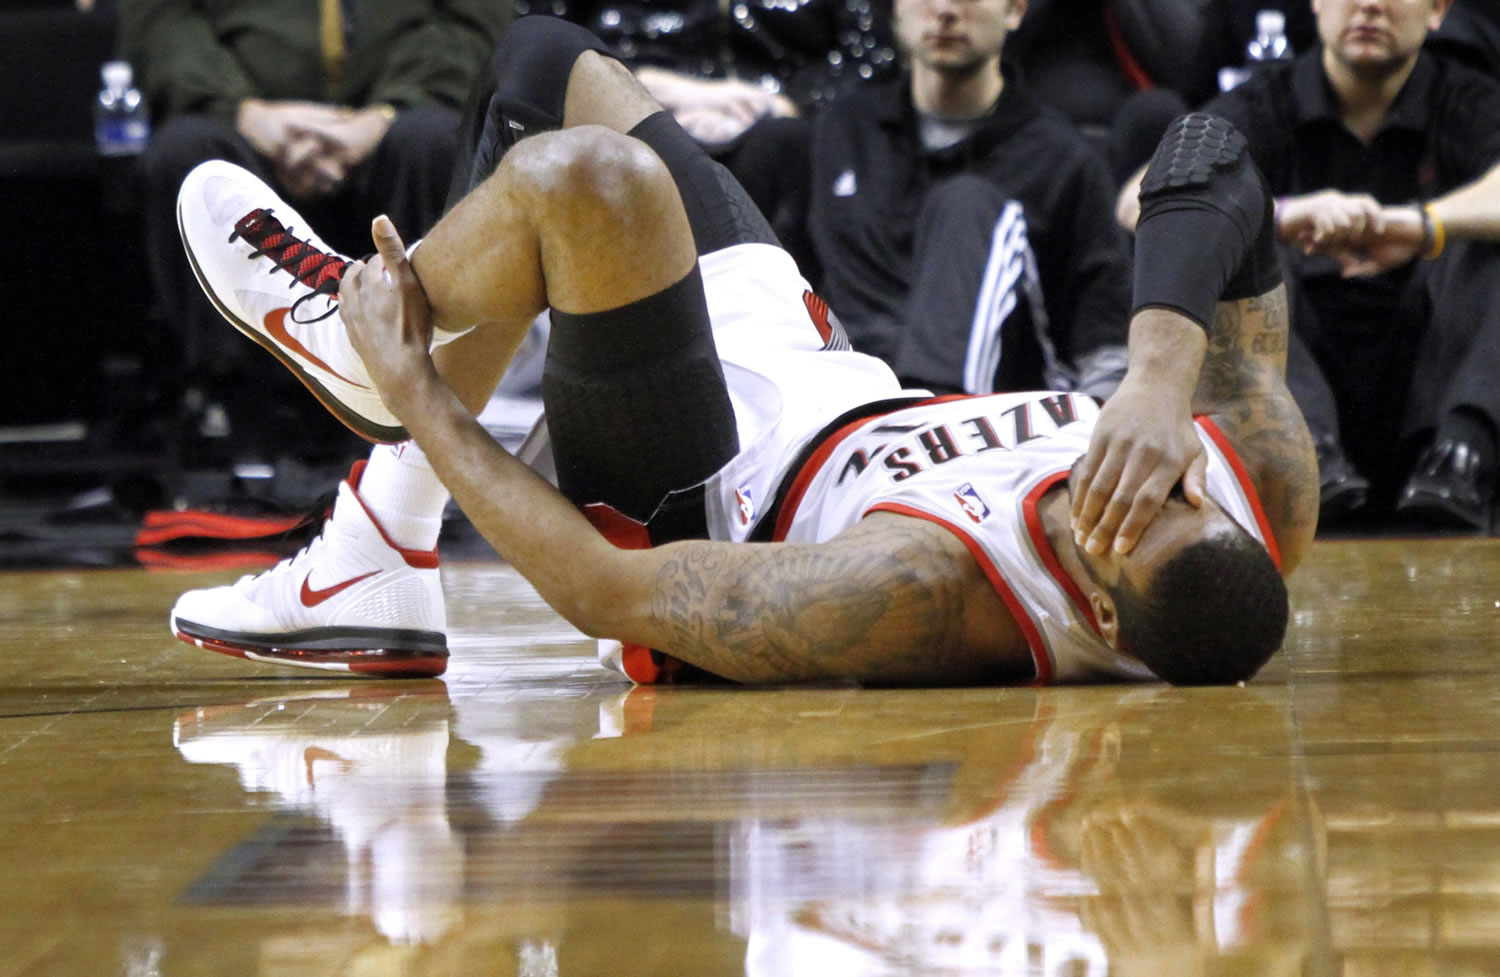 Portland Trail Blazers forward LaMarcus Aldridge holds his ankle after landing on another players' foot during the first quarter of their NBA basketball game against the Washington Wizards in Portland Tuesday.